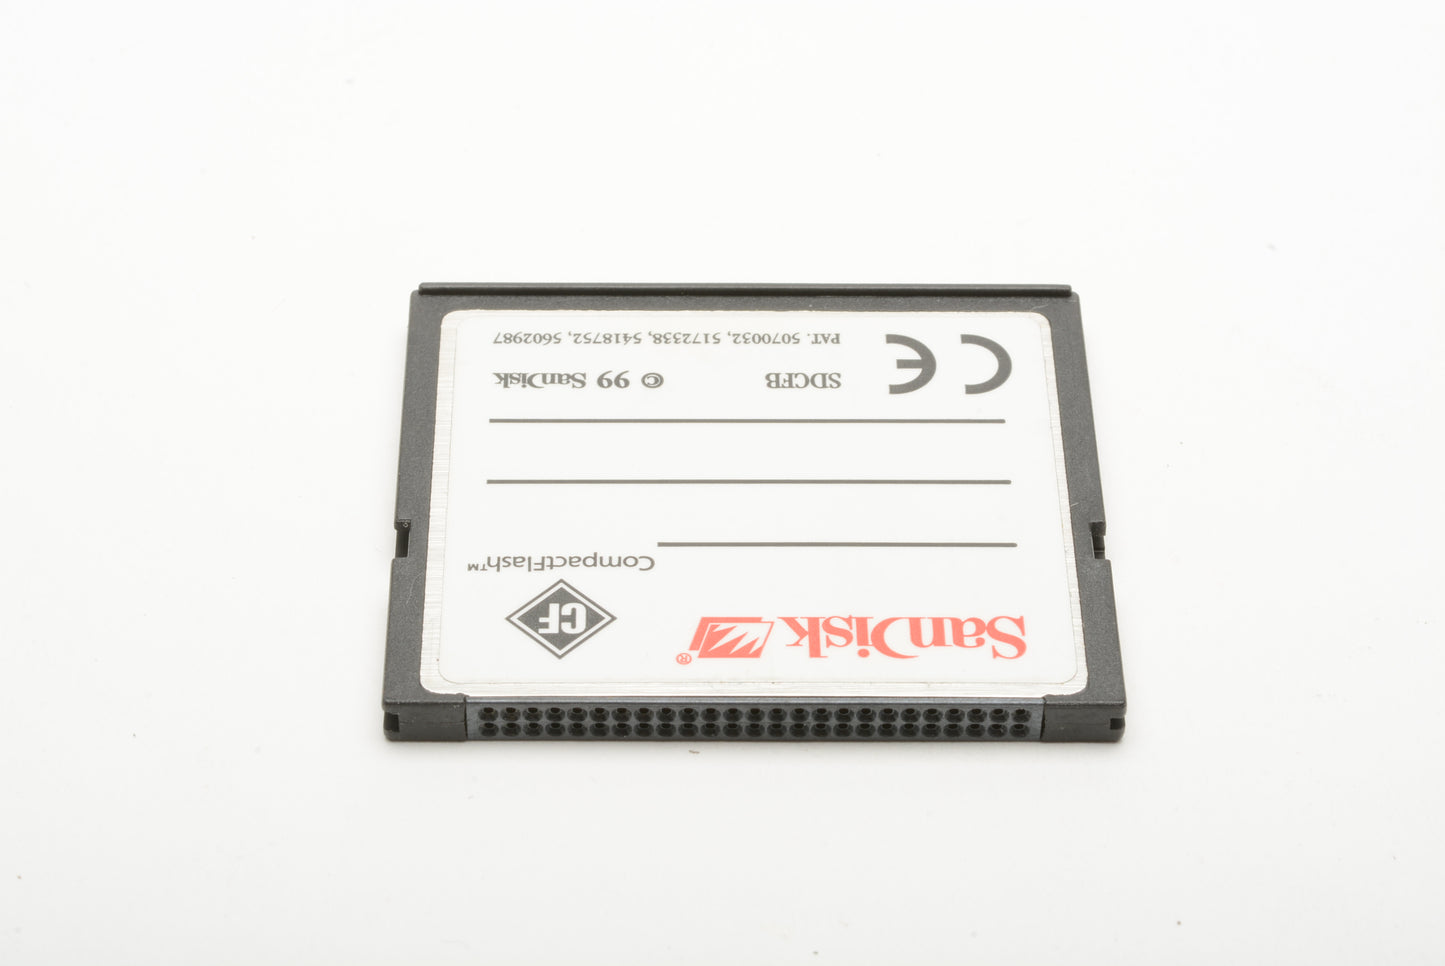 2X Sandisk 32MB CF cards in jewel cases